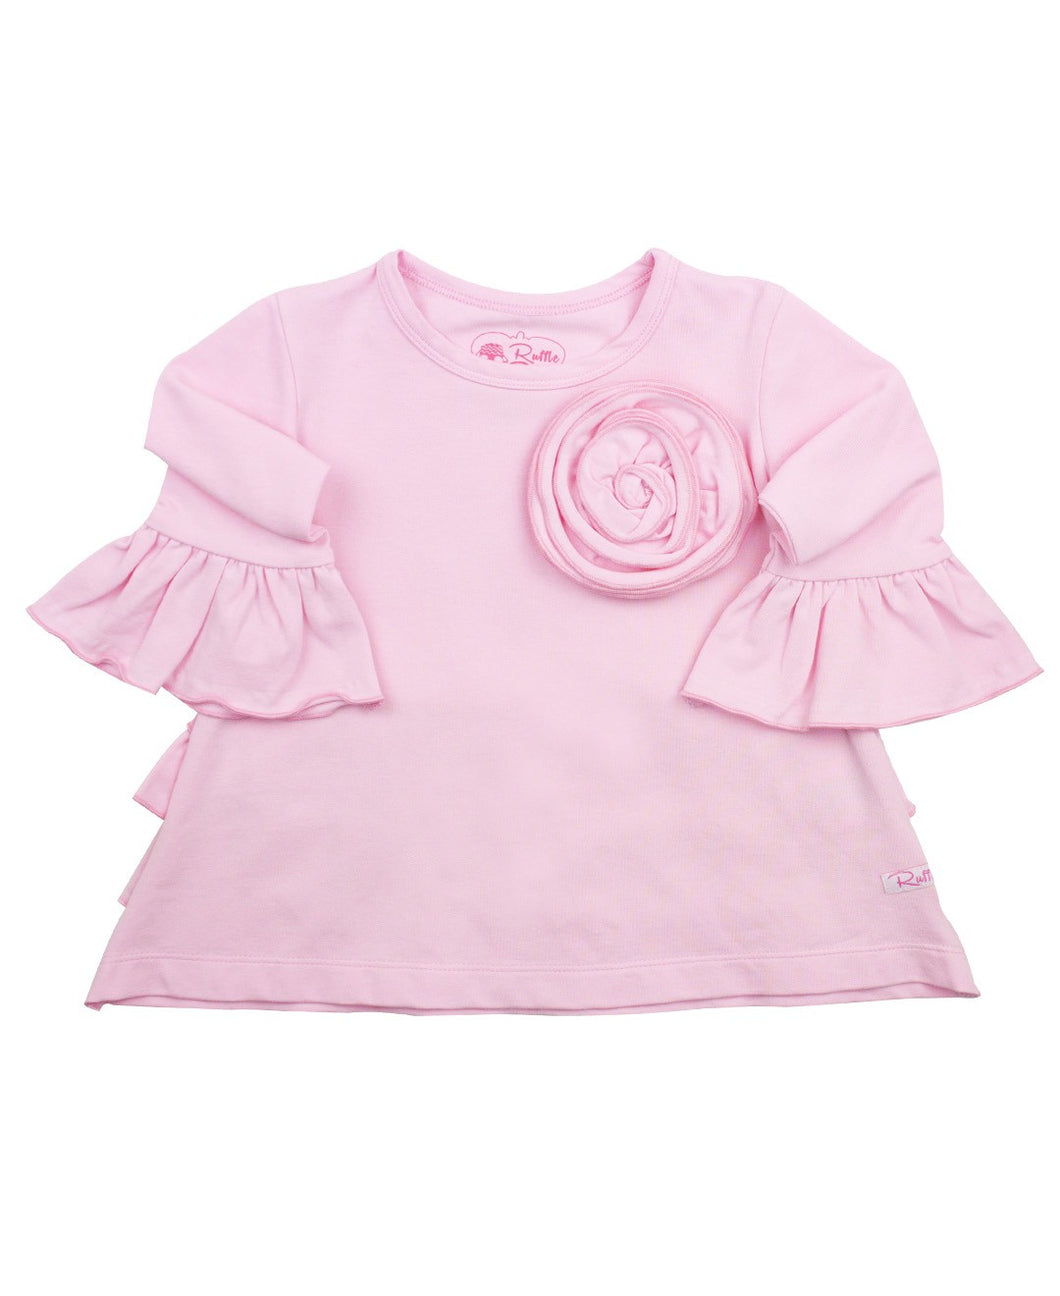 Pink Lucy Tunic * 6-12M 12-18M 18-24M 2T 3T 4T